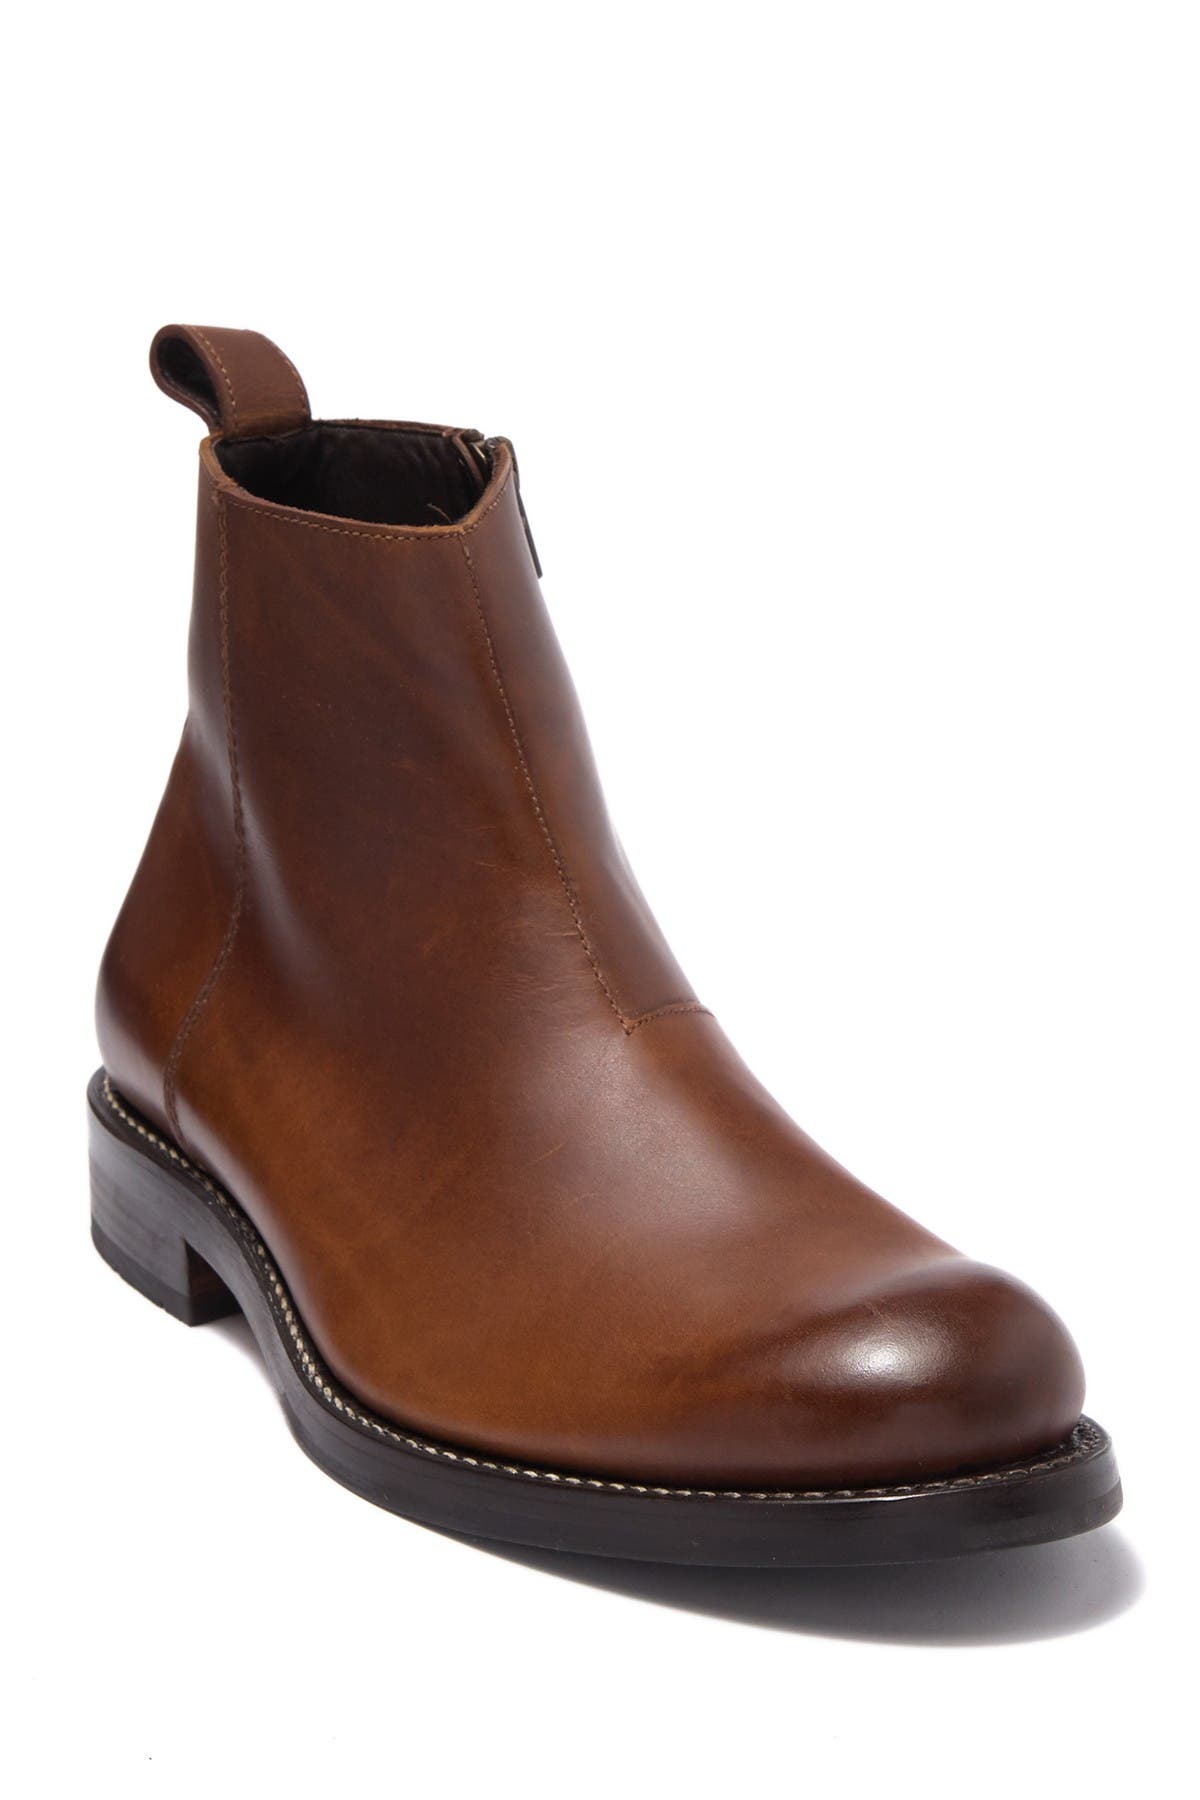 Wolverine | Montague Zip Leather Boot 